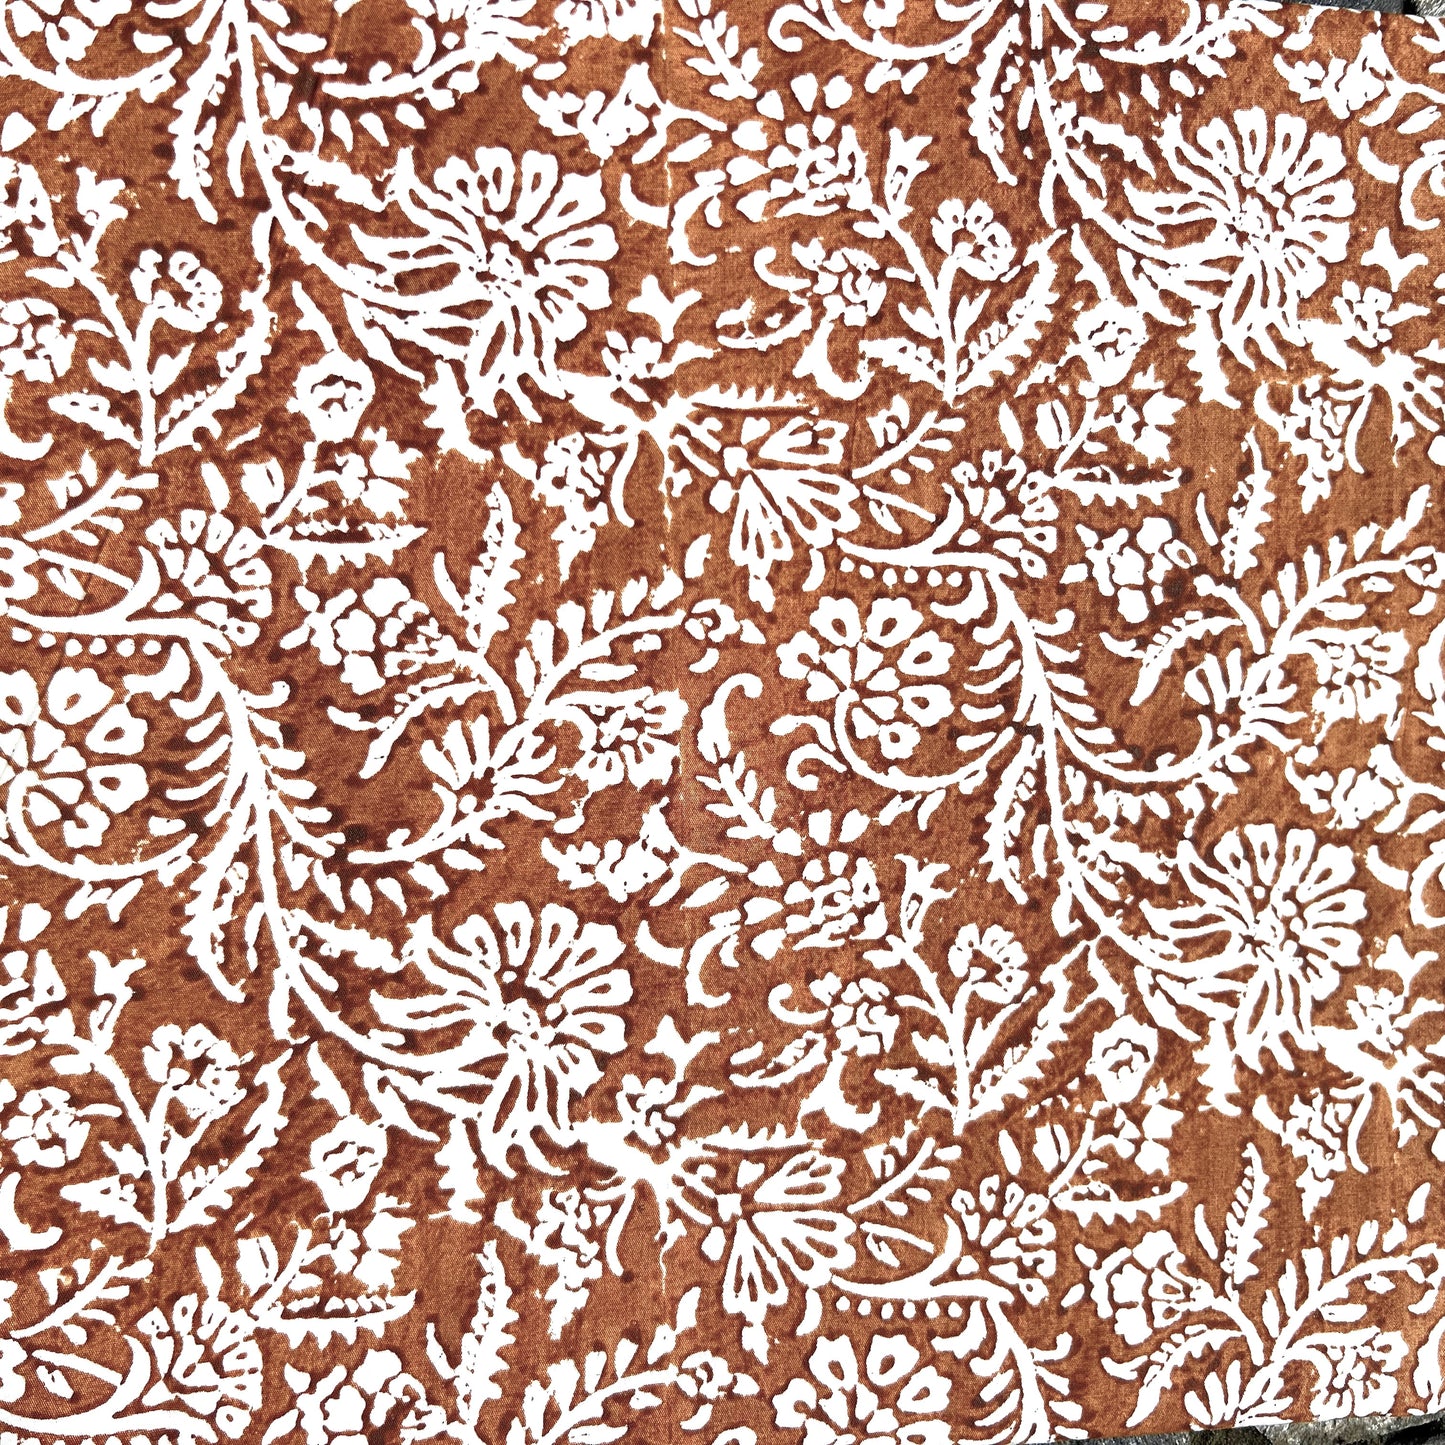 leaf block print cotton tablecloth natural and coffee